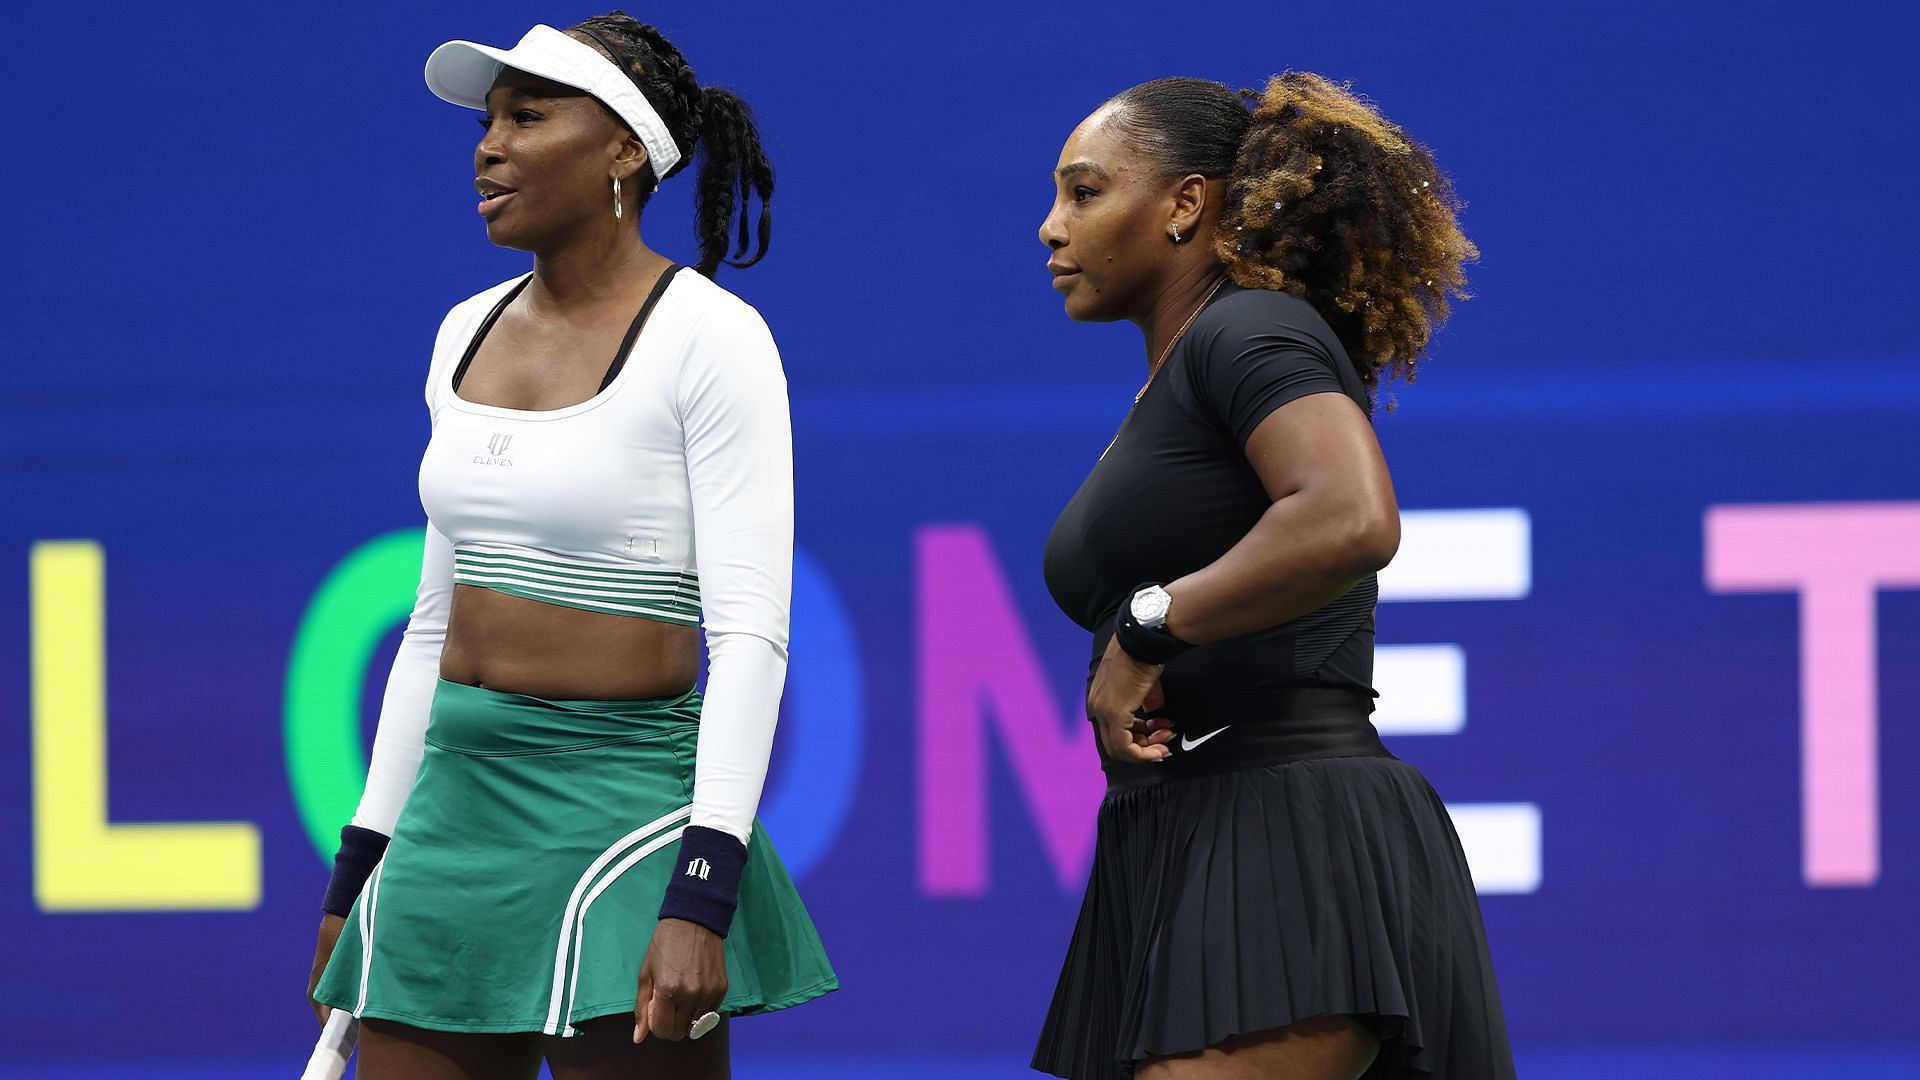 Serena Williams and Venus Williams in action on the tennis court 